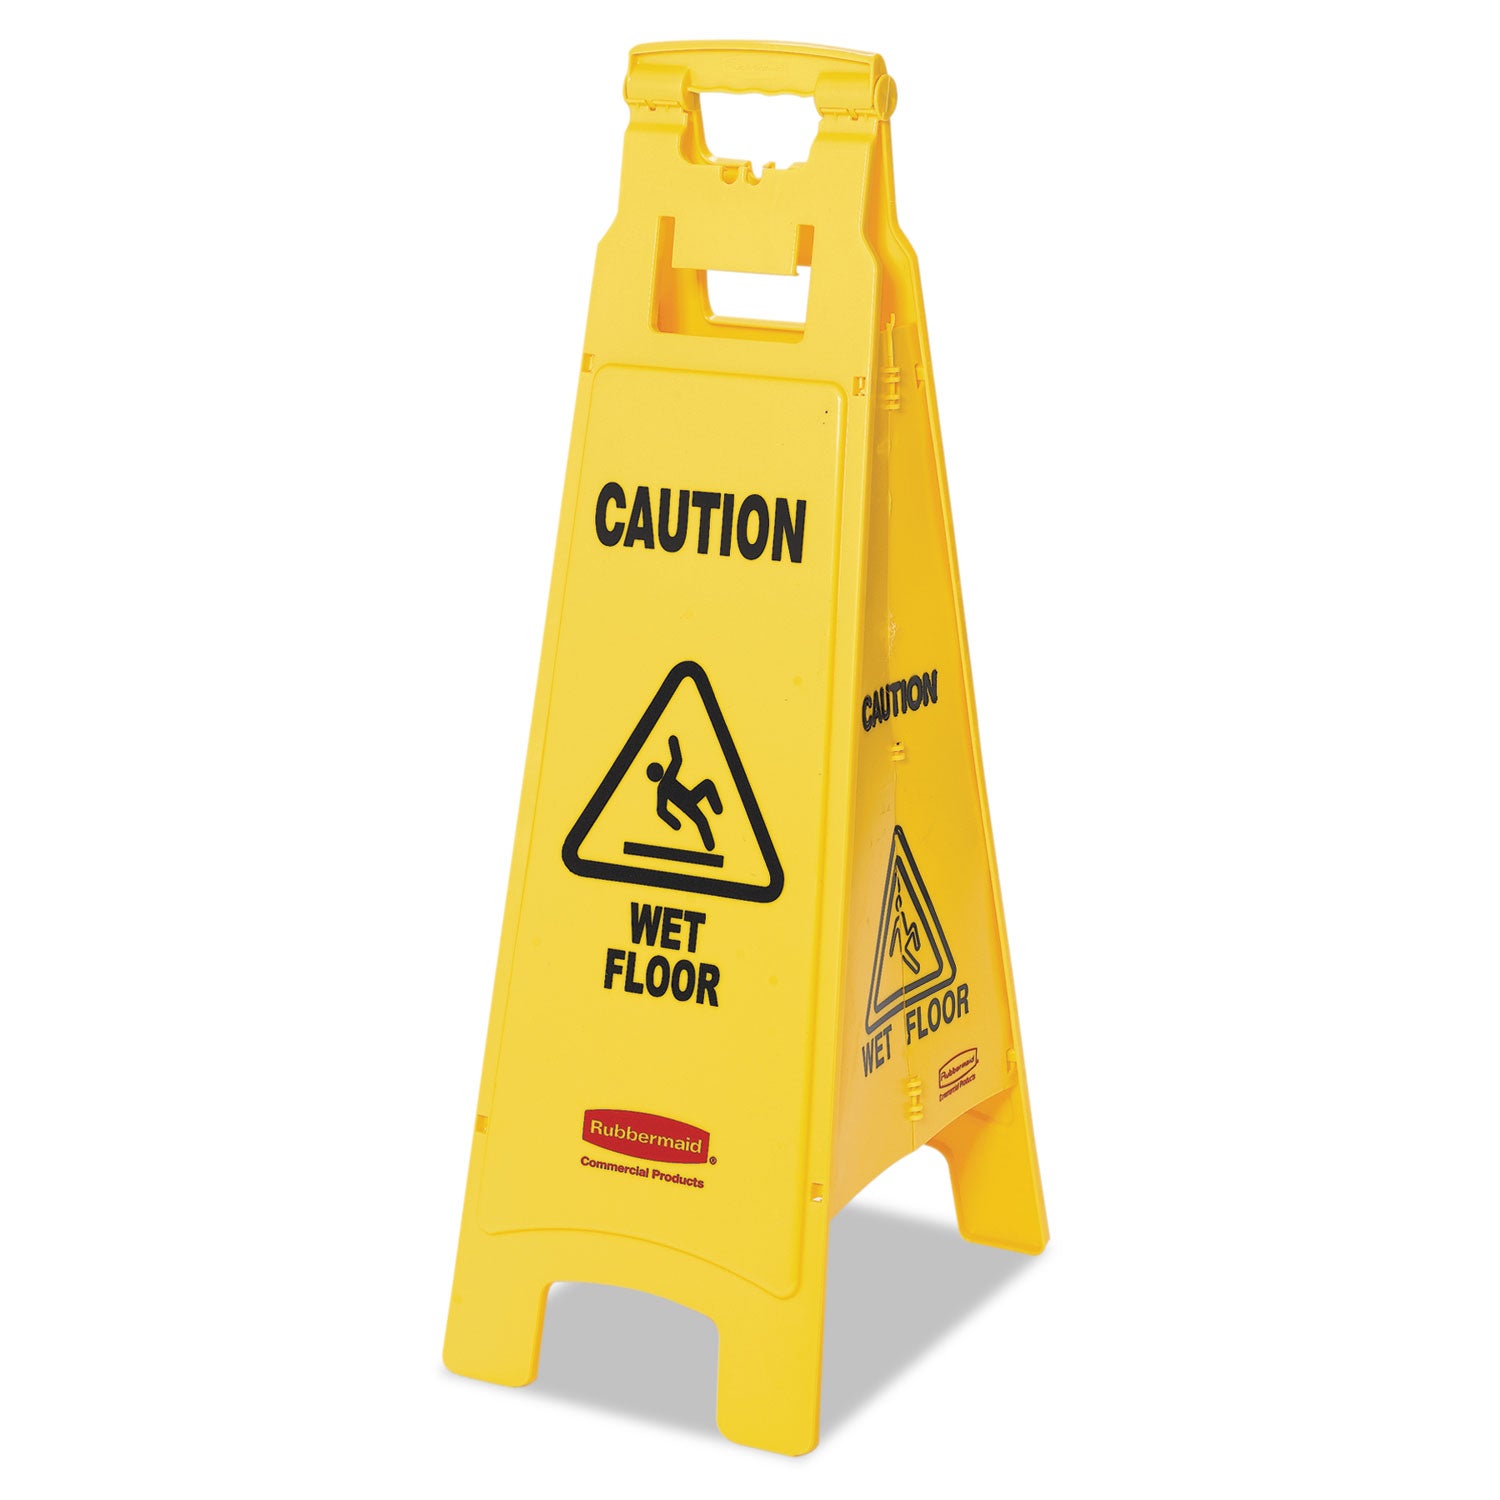 Caution Wet Floor Sign, 4-Sided, 12 x 16 x 38, Yellow - 